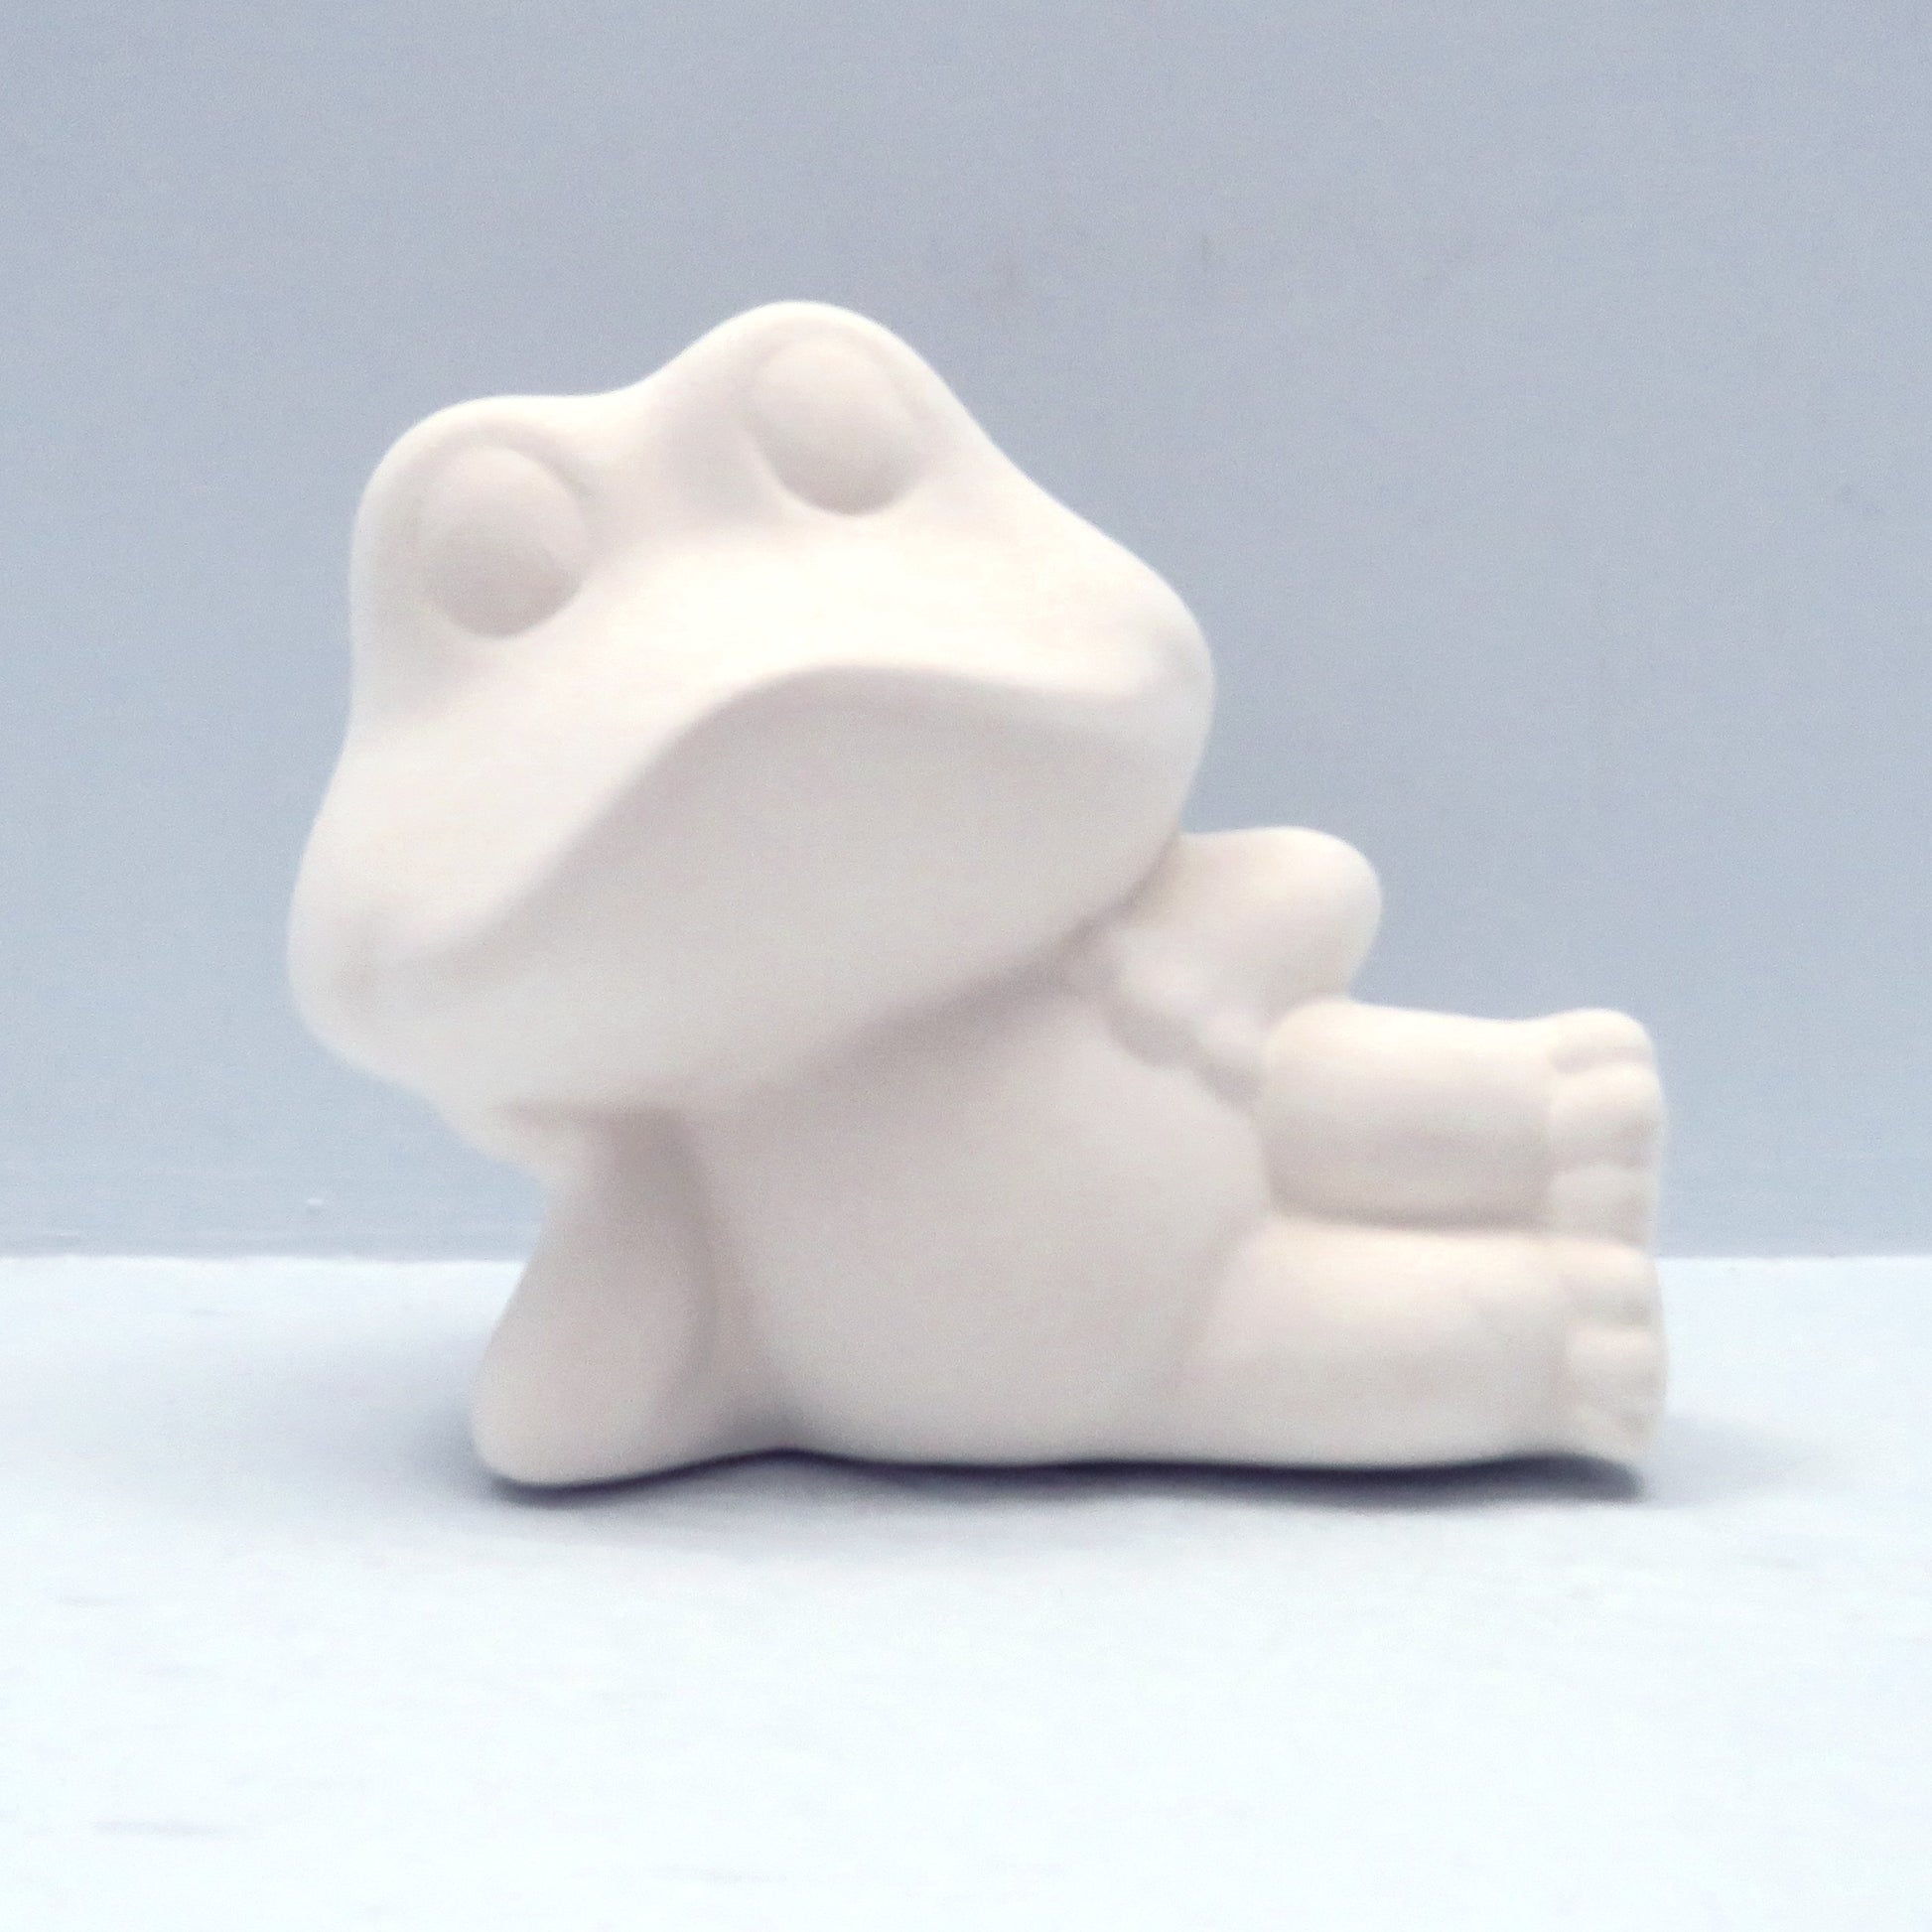 Paintable ceramic frog figurine lying on his right side with his head resting on his right hand on a blue background